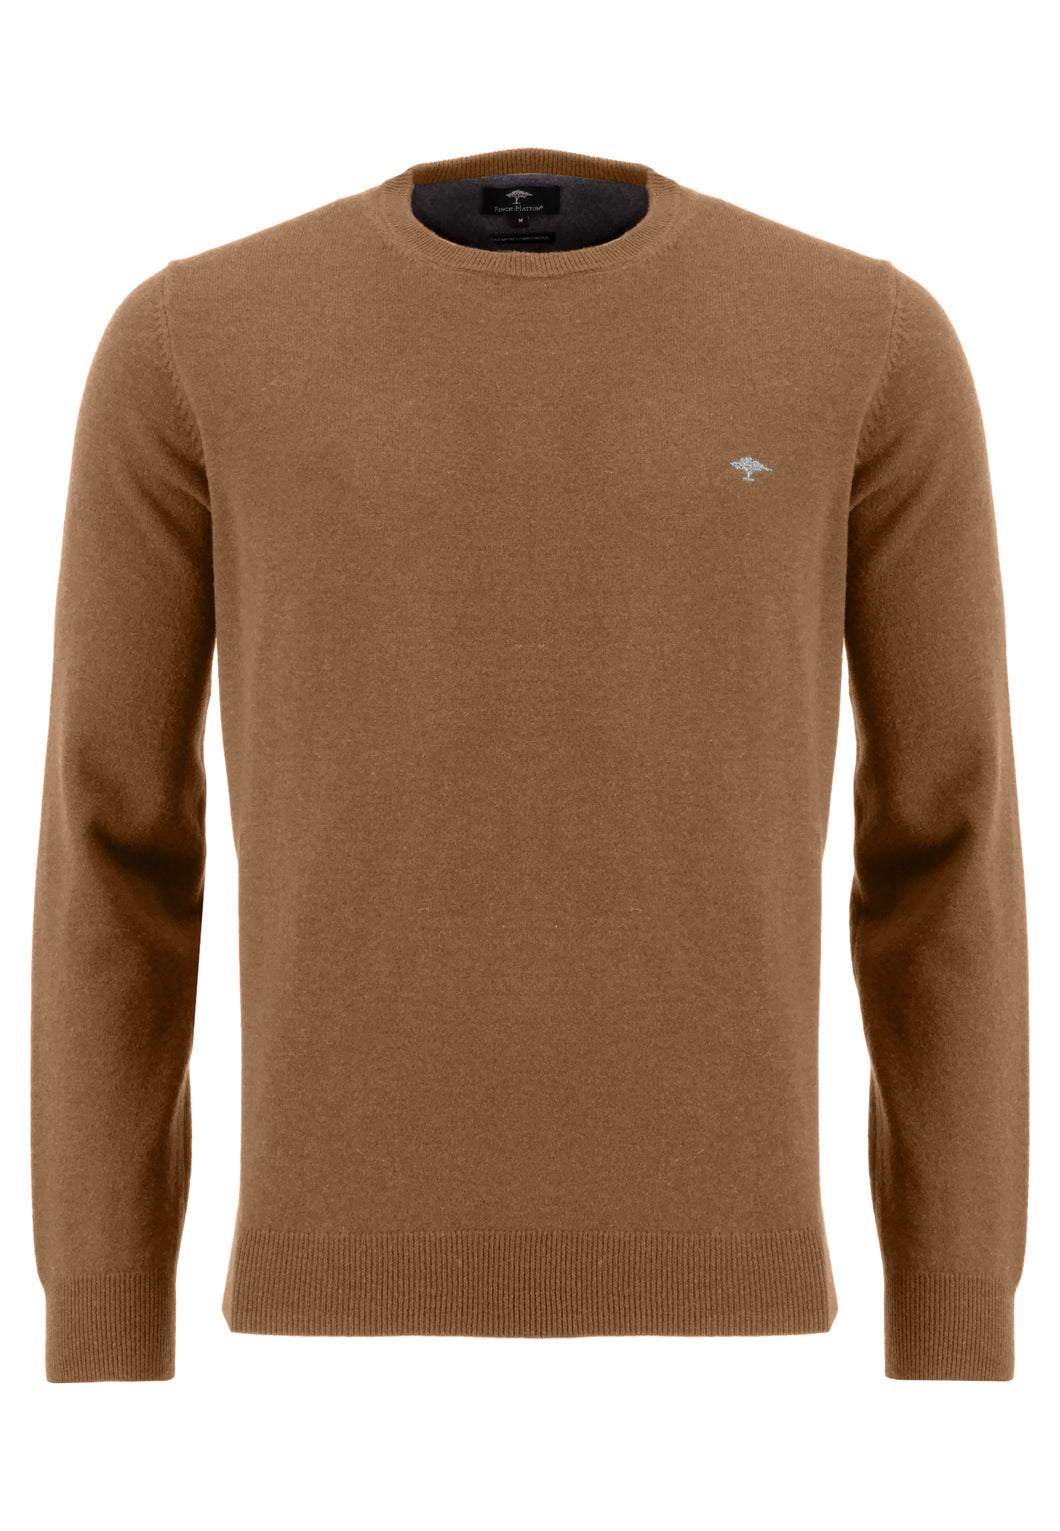 Fynch Hatton, - Premium Lambswool Sweater with Crew Neck, Camel